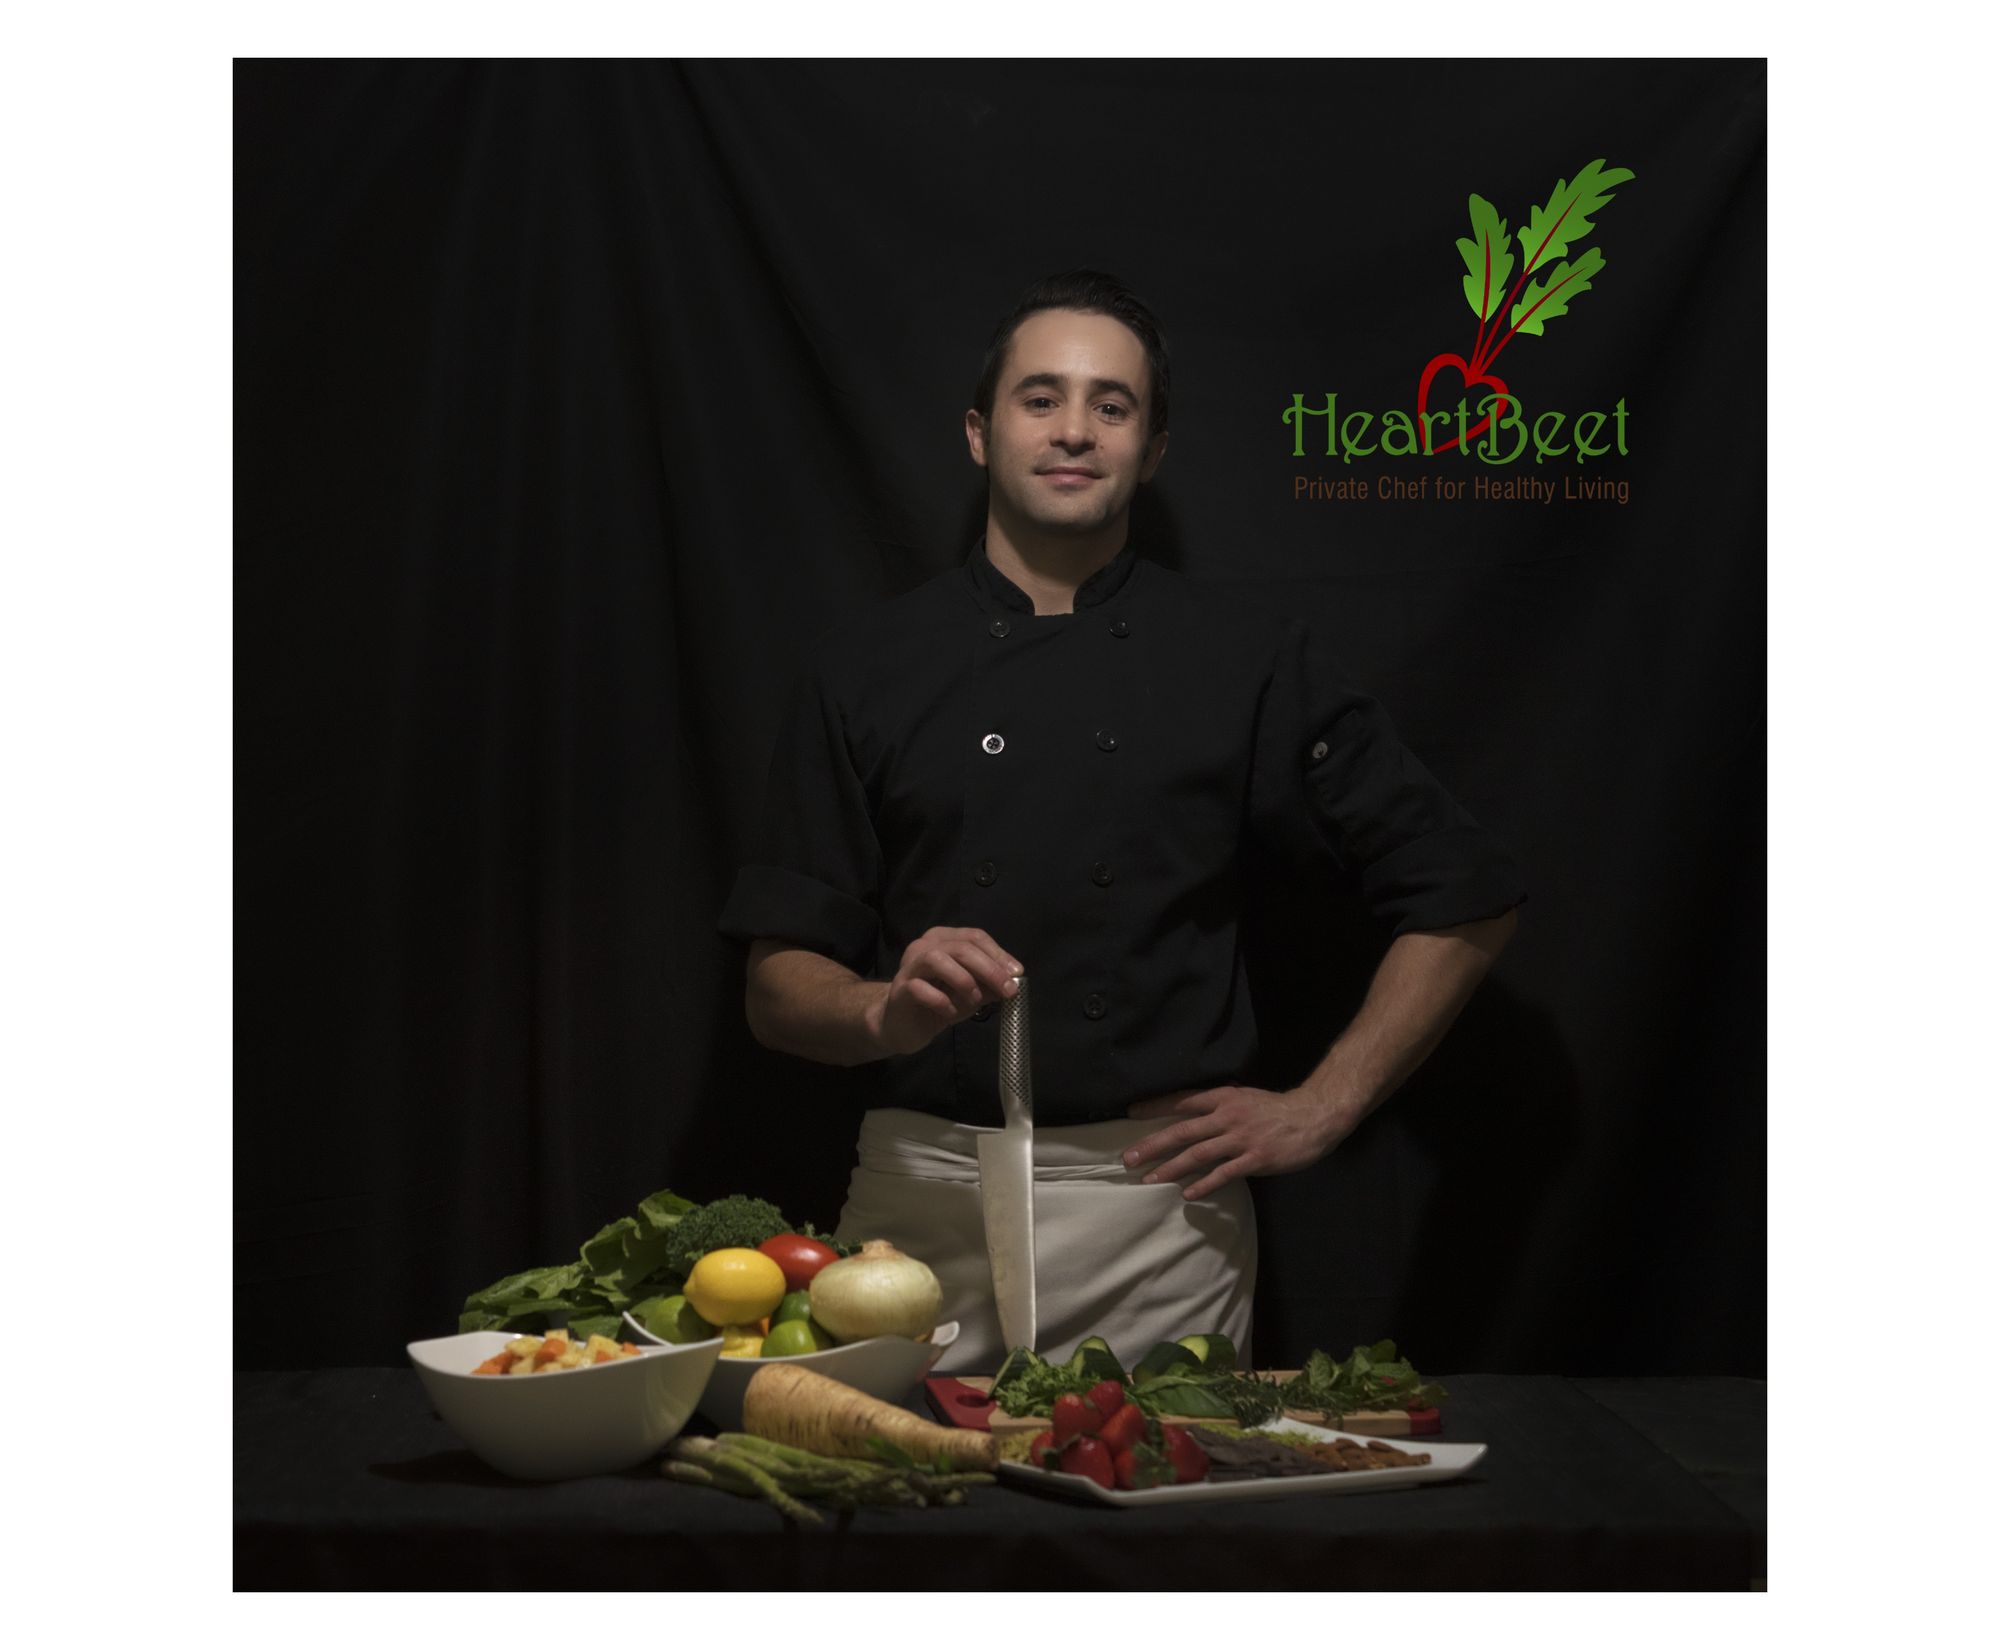 Private Chef for Healthy Living - Heartbeet Chef